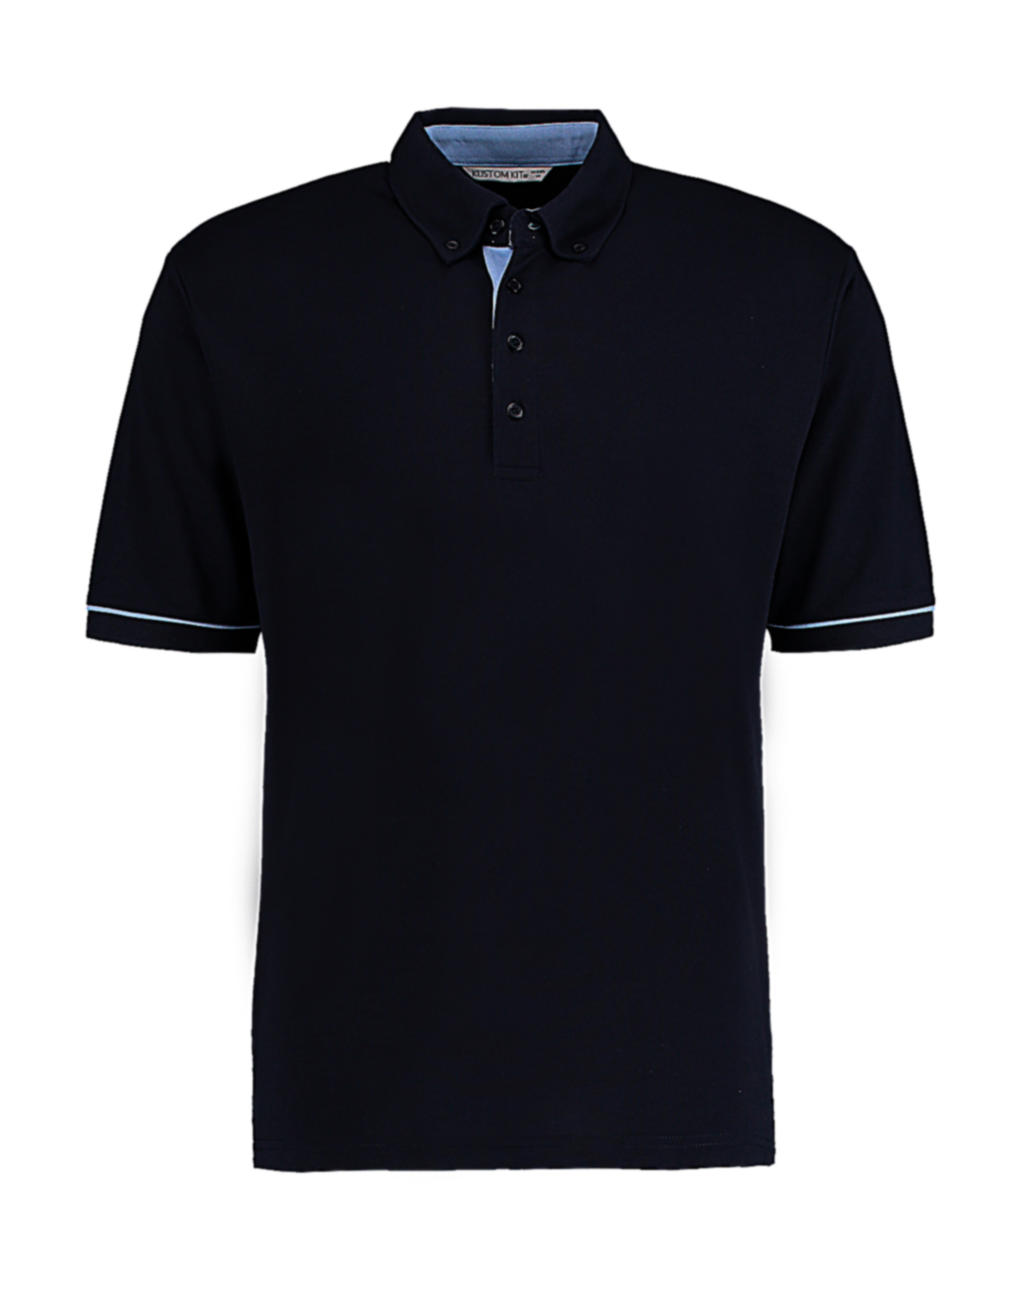  Classic Fit Button Down Contrast Polo Shirt in Farbe Navy/Light Blue